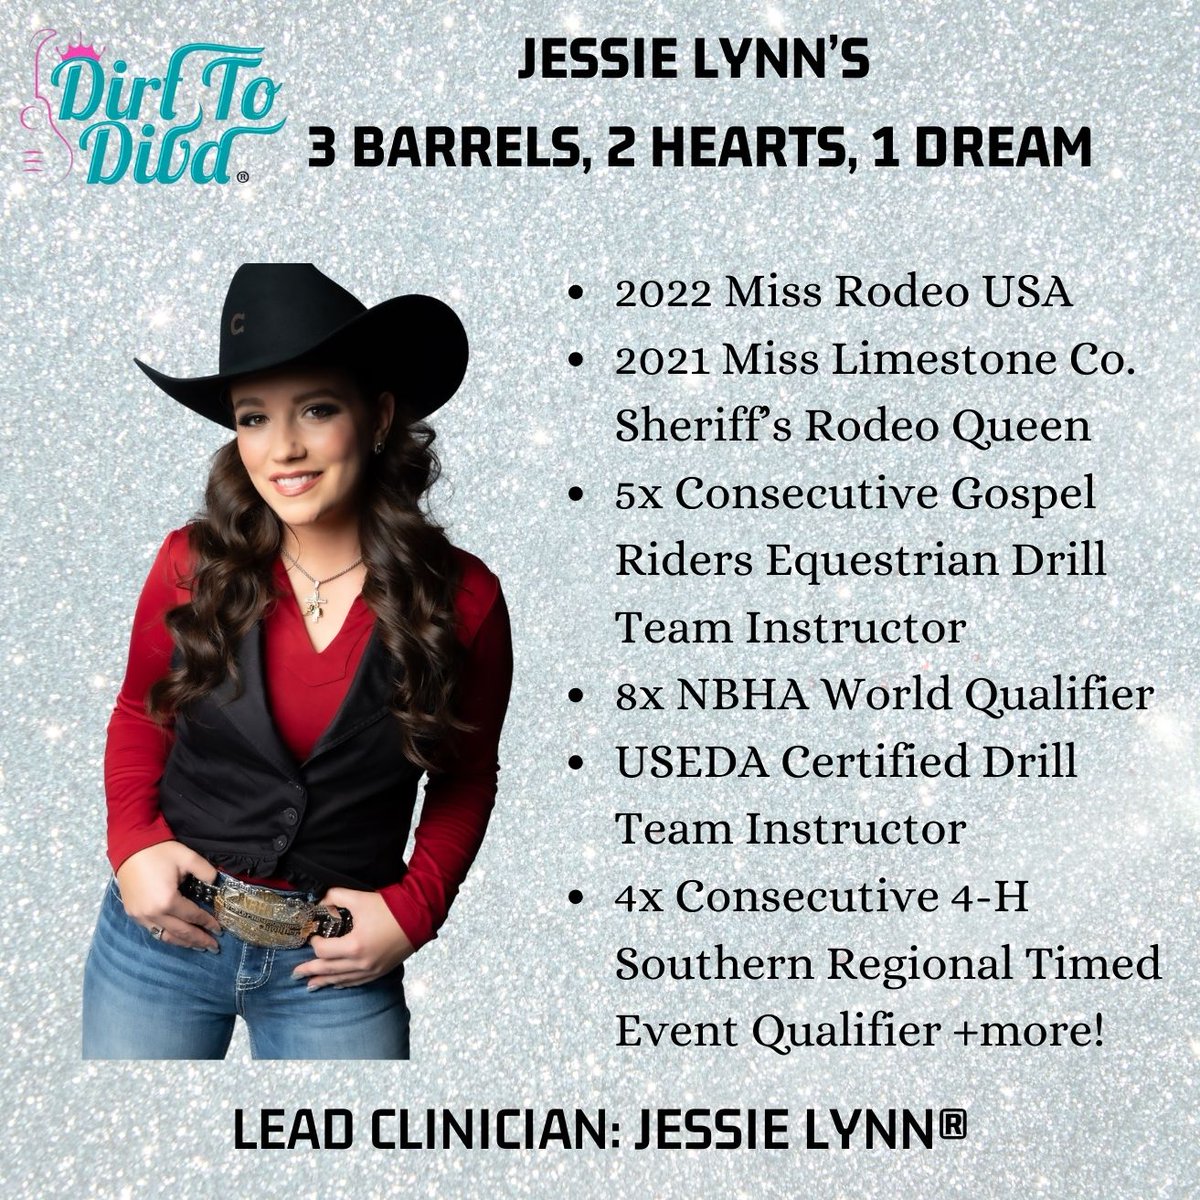 🚨 Dirt to Diva Productions, LLC. 3 Barrels, 2 Hearts, 1 Dream Barrel Racing Clinic Registration Closes Today 🚨

If you have not yet registered for the April 6, 2024 Barrel Racing Clinic, head on over to jessielynn.net and register before midnight tonight!